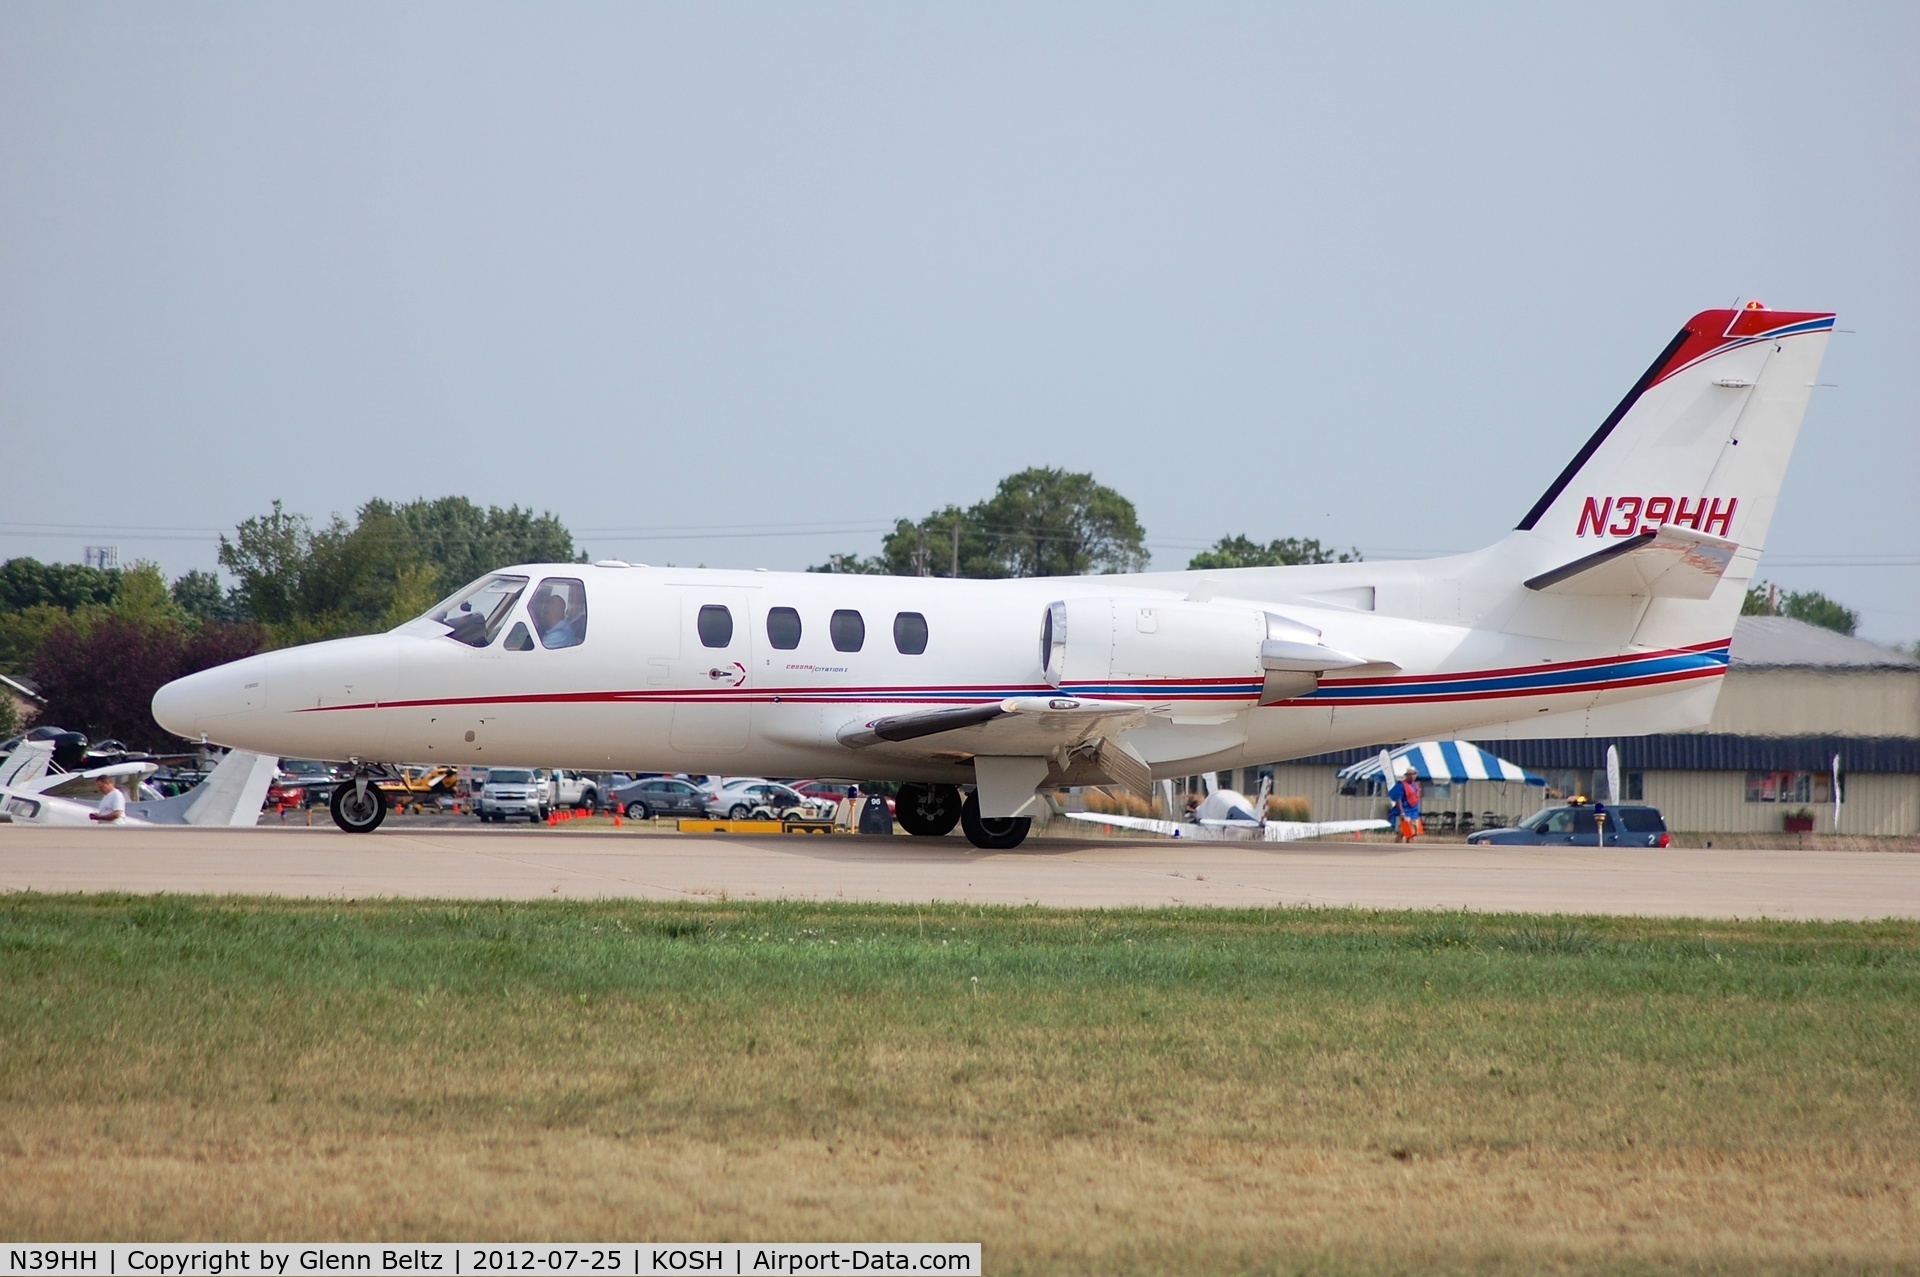 N39HH, 1979 Cessna 501 Citation I/SP C/N 501-0132, Taxiing at Oshkosh on 25 July 2012.